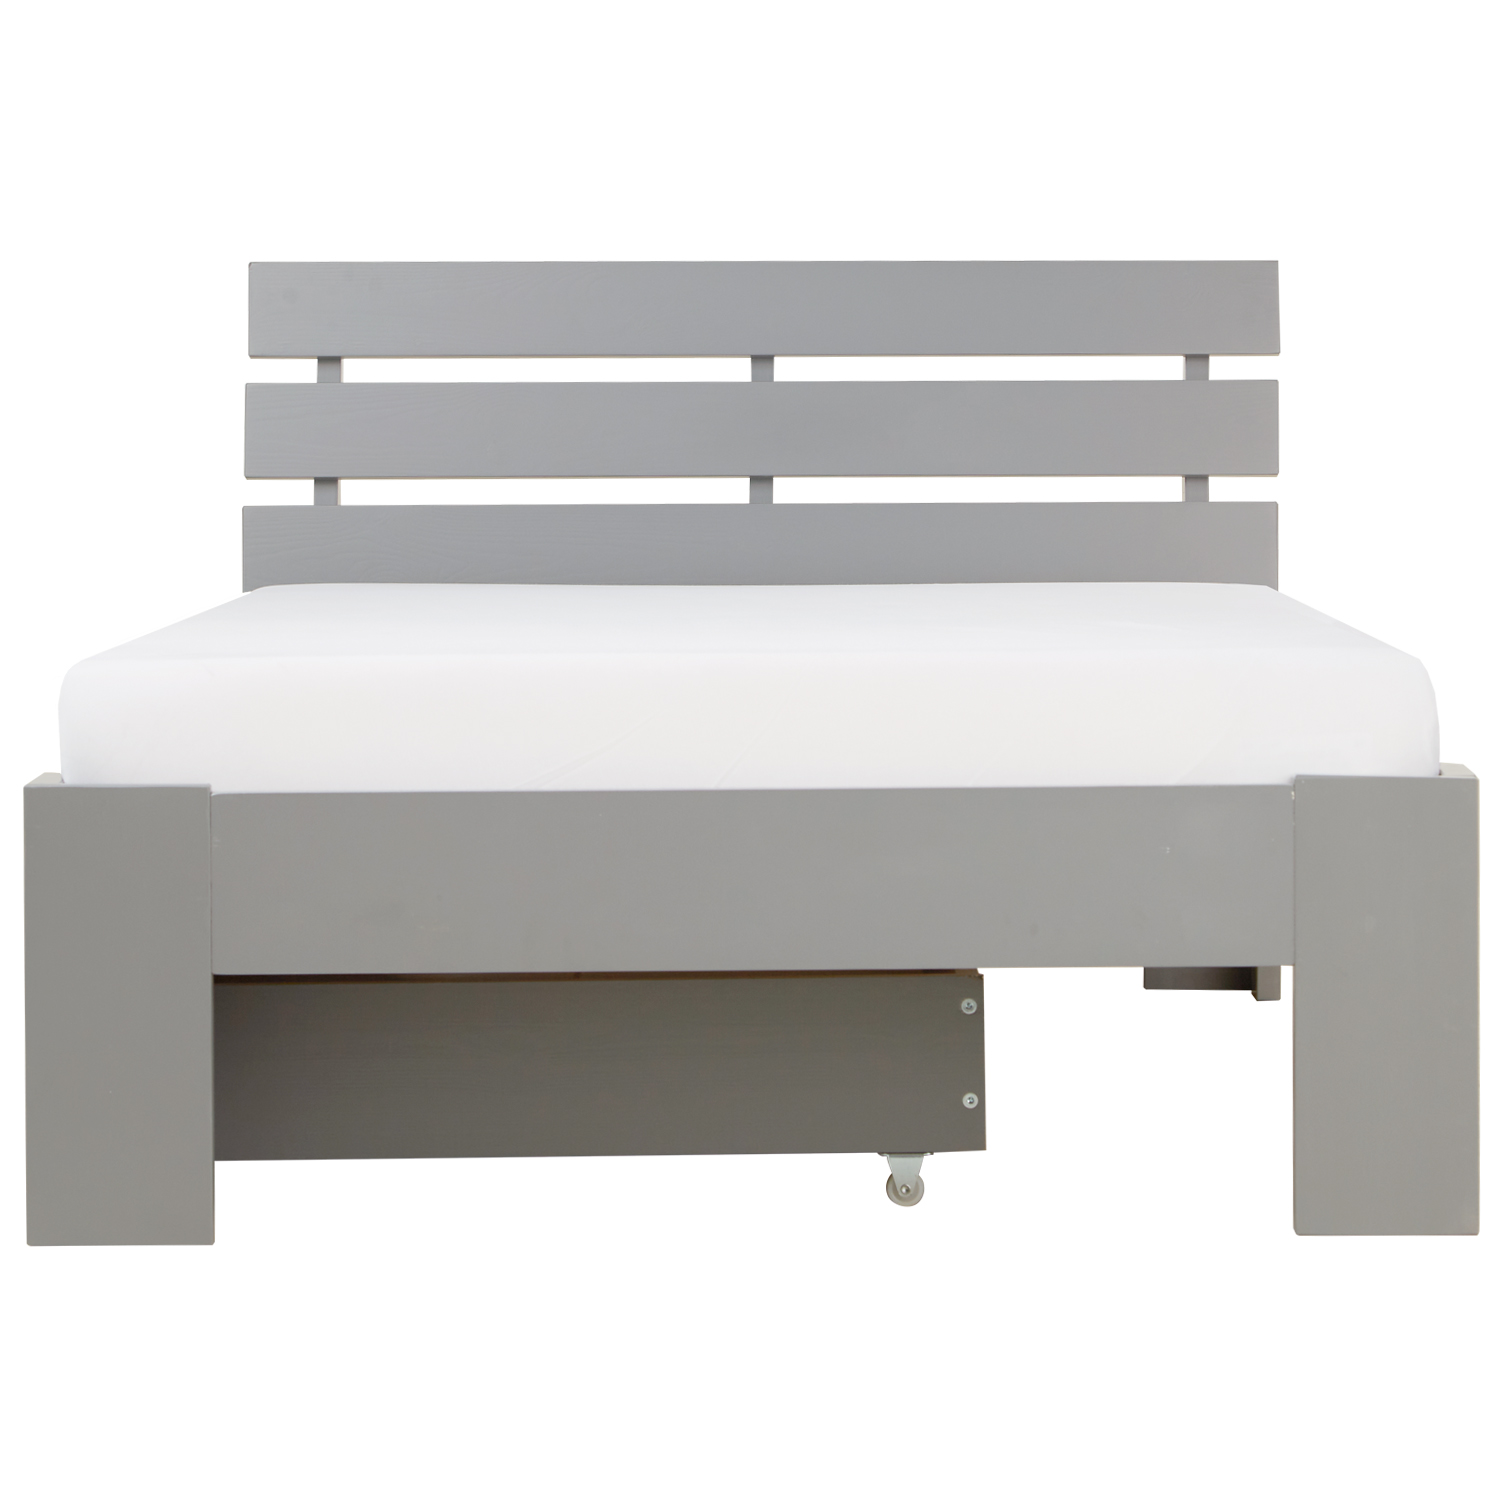 Single Bed 90x200 with Drawer Wooden Bed Slatted Frame Grey Bed Bedstead Solid Wood